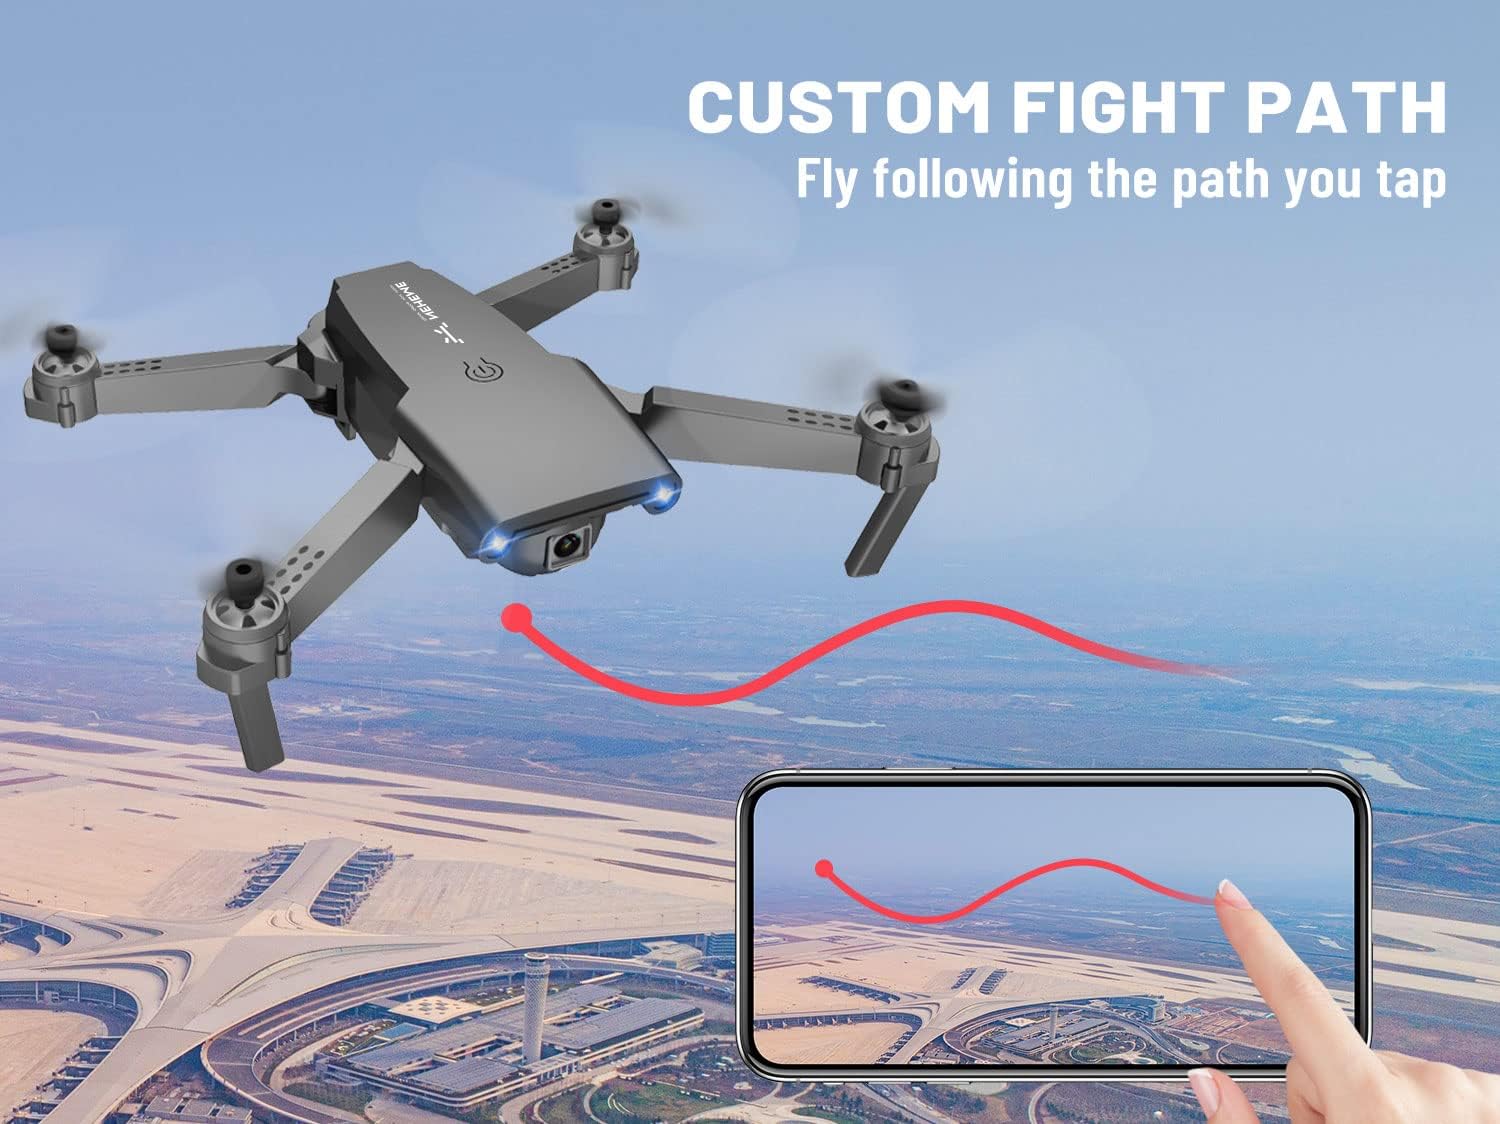 NEHEME NH525 Foldable Drones with 1080P HD Camera for Adults, RC Quadcopter WiFi FPV Live Video, Altitude Hold, Headless Mode, One Key Take Off for Kids or Beginners with 2 Batteries